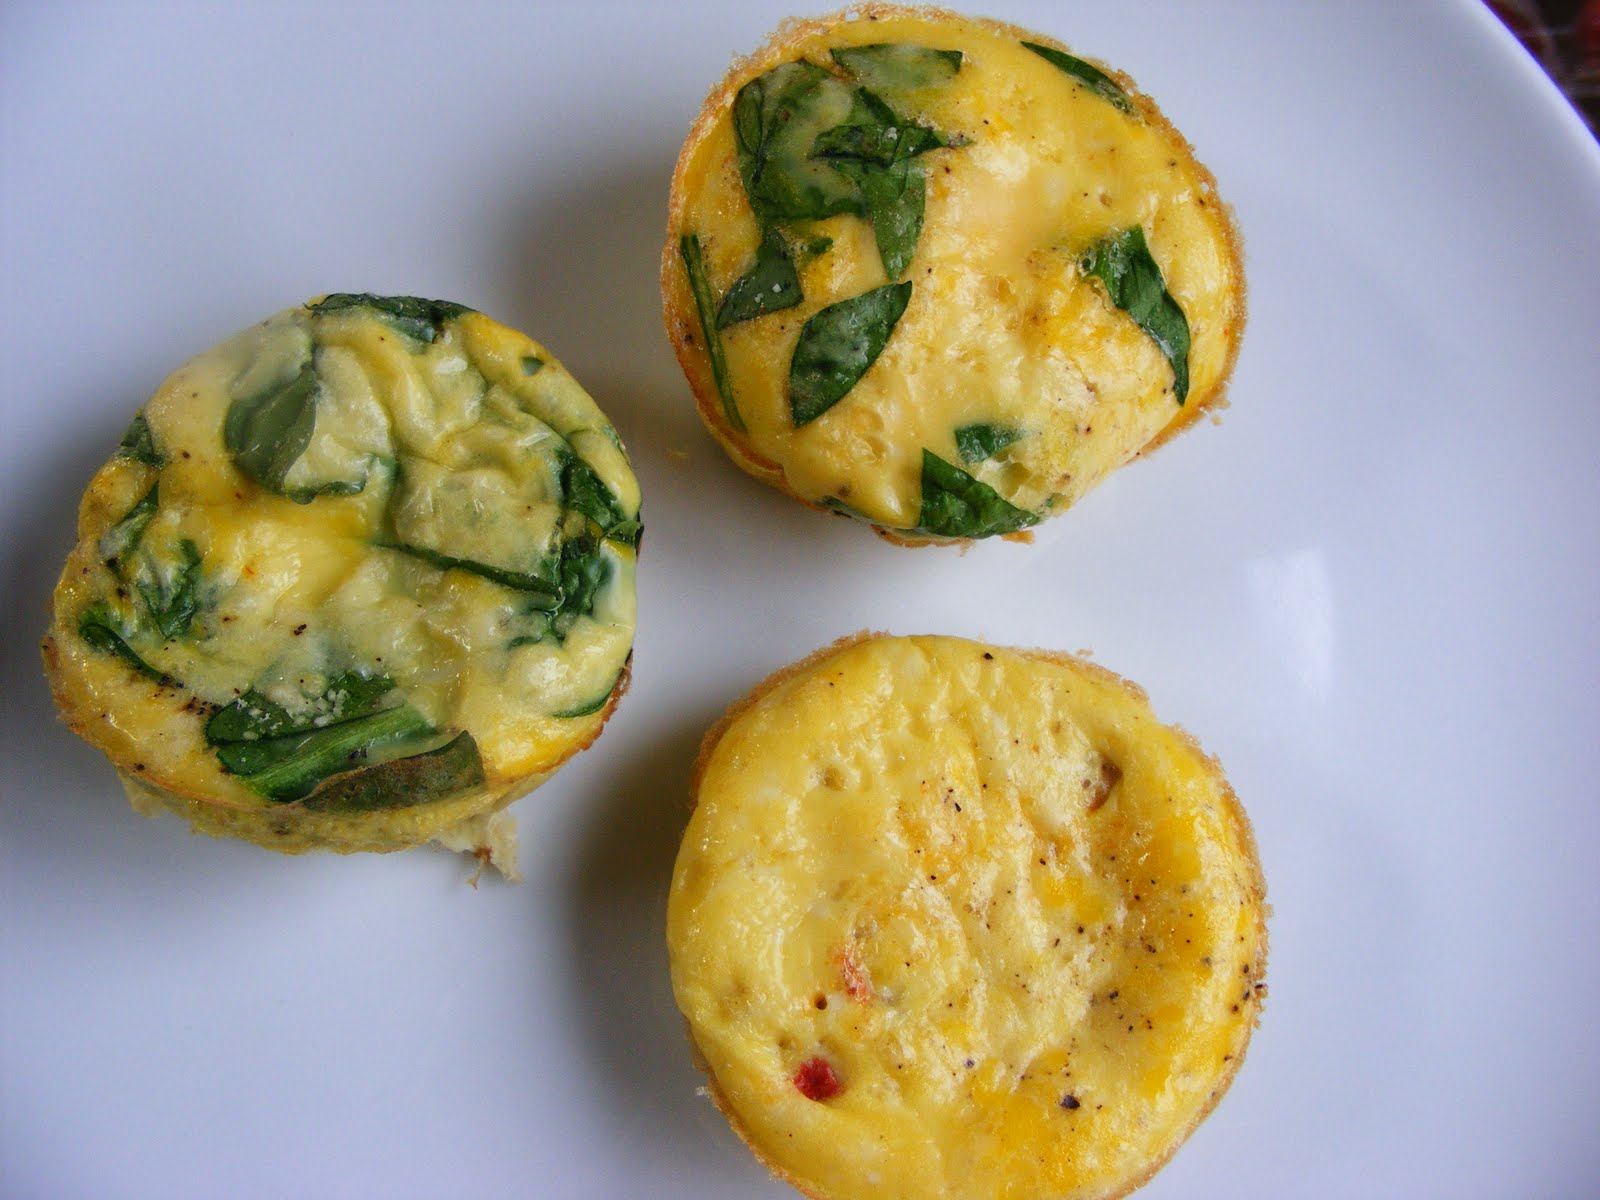 The Lunch Lady: Egg quiche muffin thingies